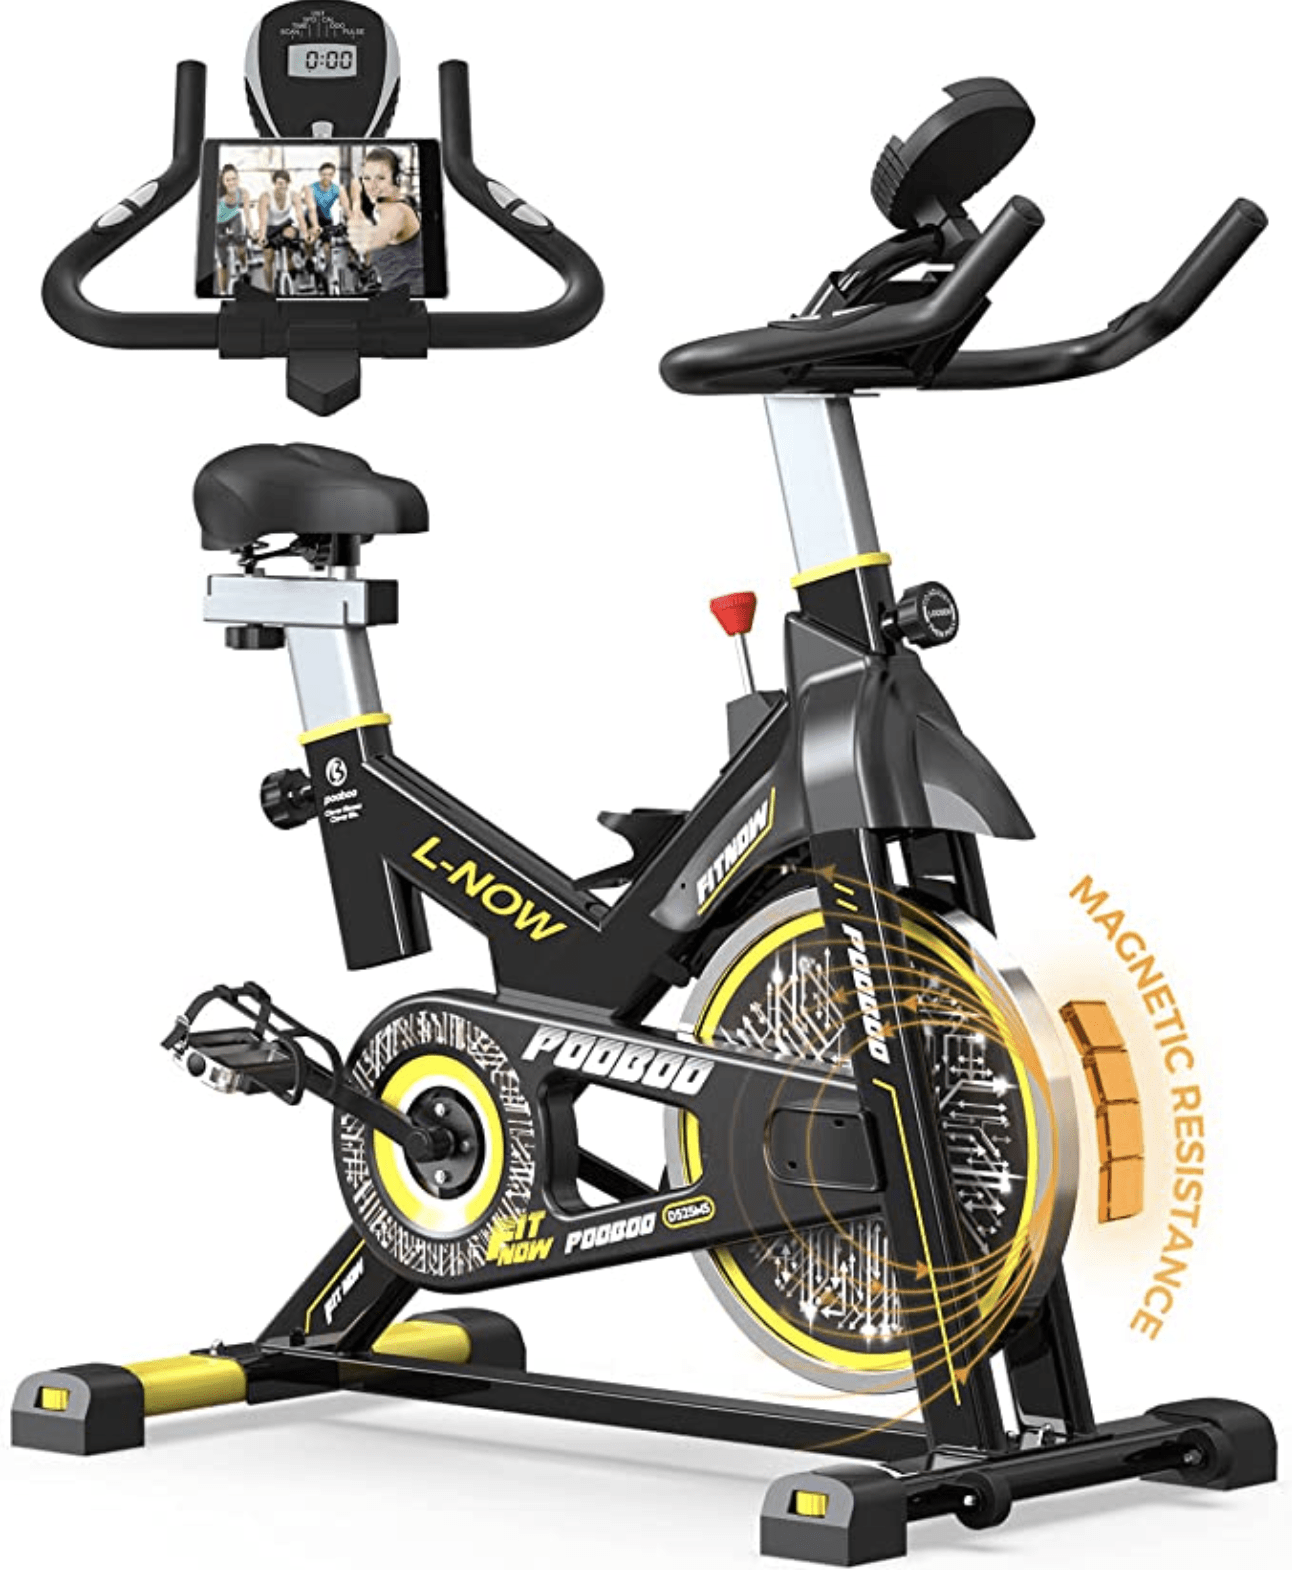 Indoor Exercise Bike pooboo Indoor Cyling Bikes Magnetic Resistance Stationary Bikes with Rear Flywheel and LCD Display for Home Cardio Workout Bikes 